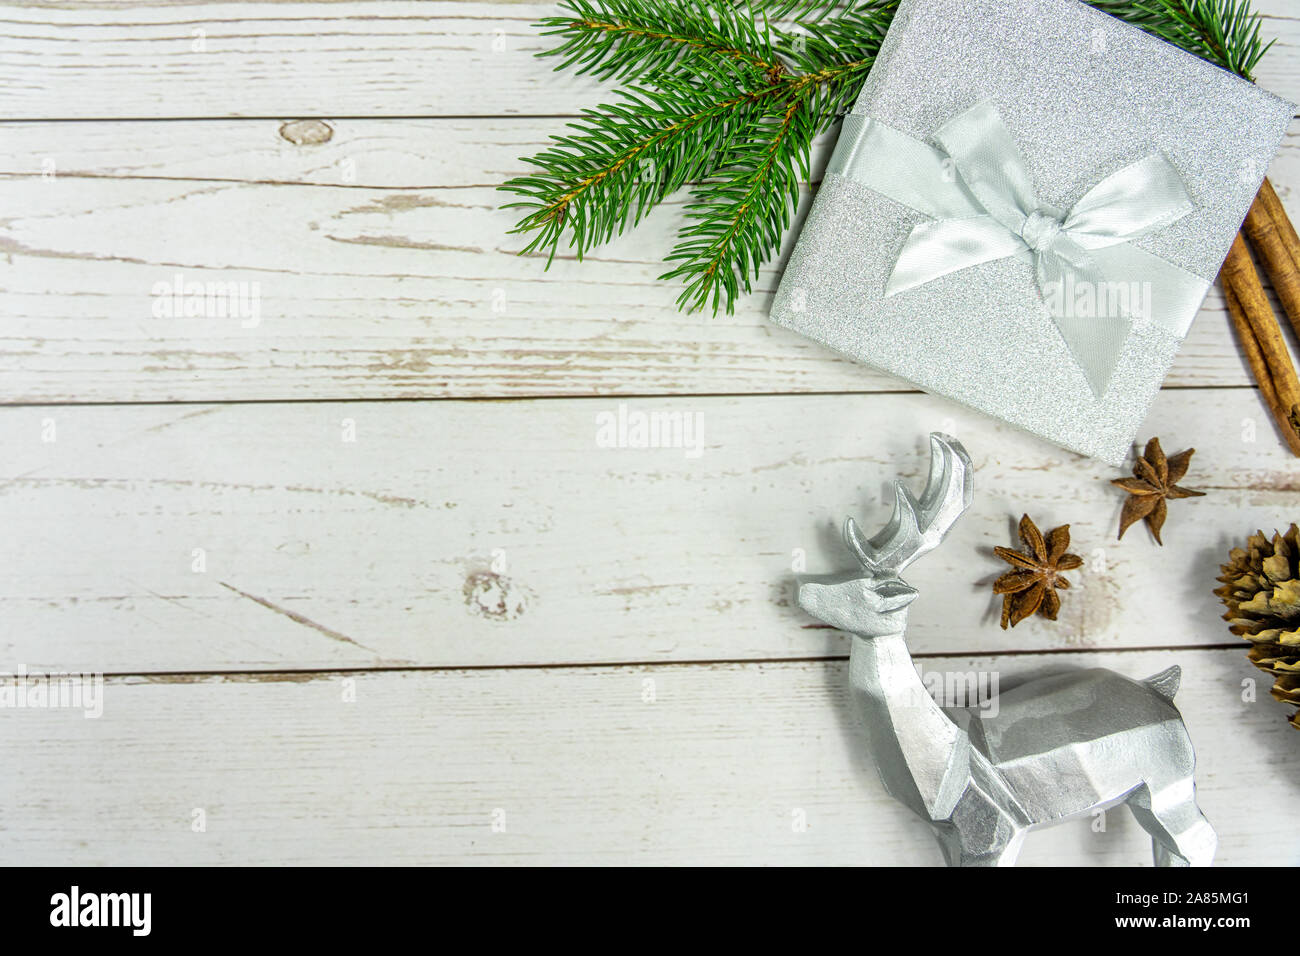 Christmas frame background on white wood with silver and natural decoration Stock Photo